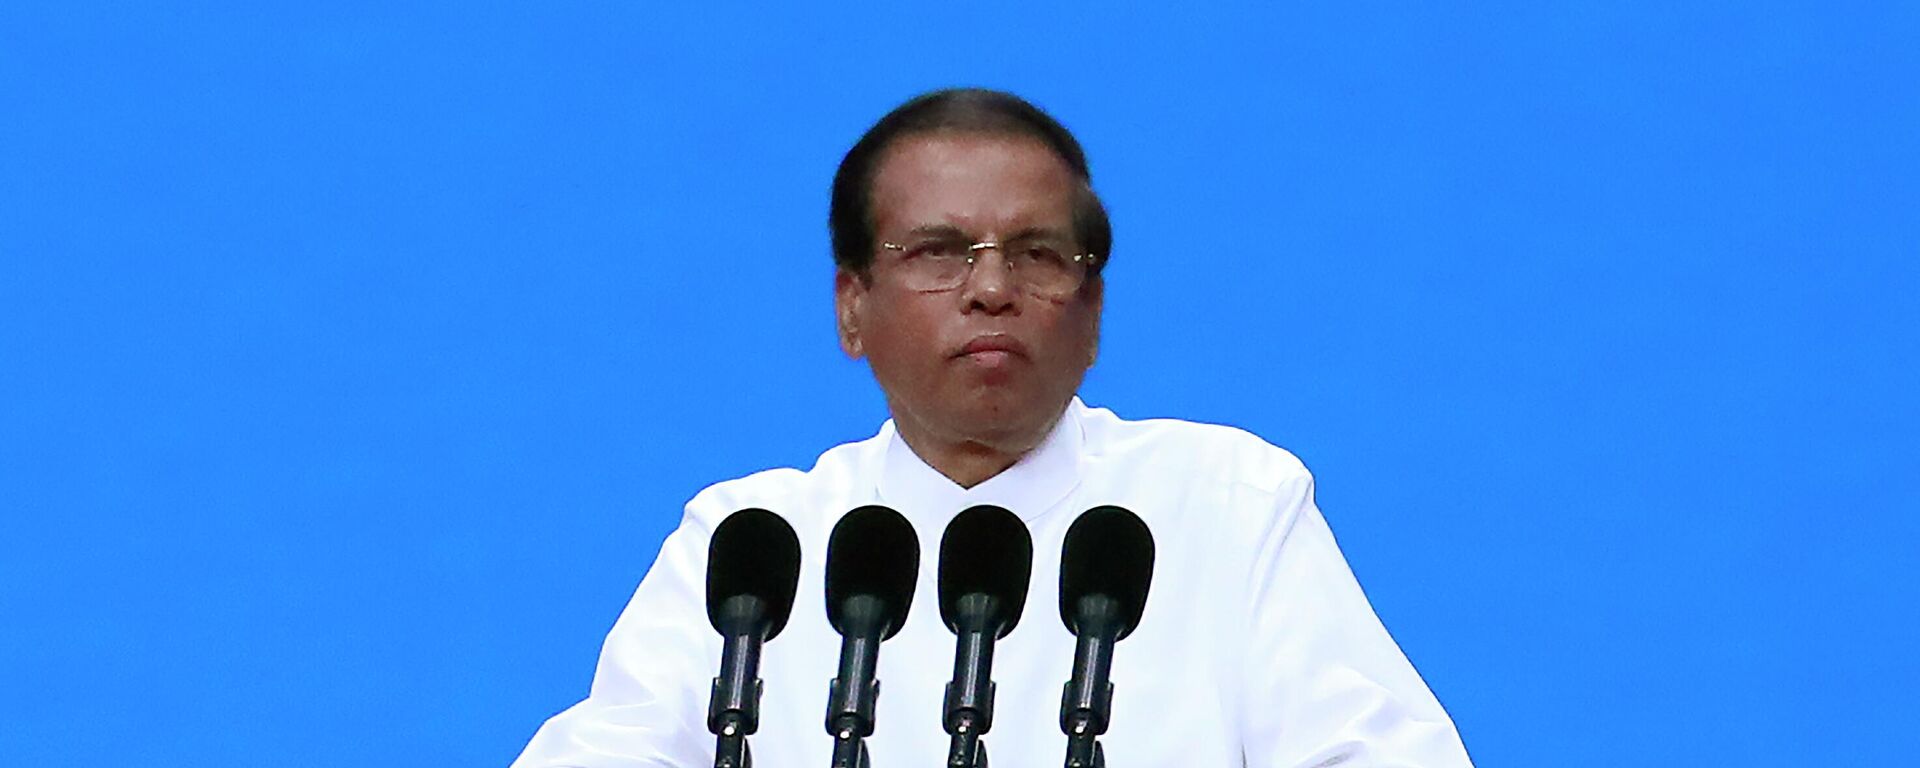 FILE - In this May 15, 2019, file photo, Sri Lanka President Maithripala Sirisena delivers a speech during the opening ceremony of the Conference on Dialogue of Asian Civilizations in Beijing, China - Sputnik International, 1920, 16.09.2022